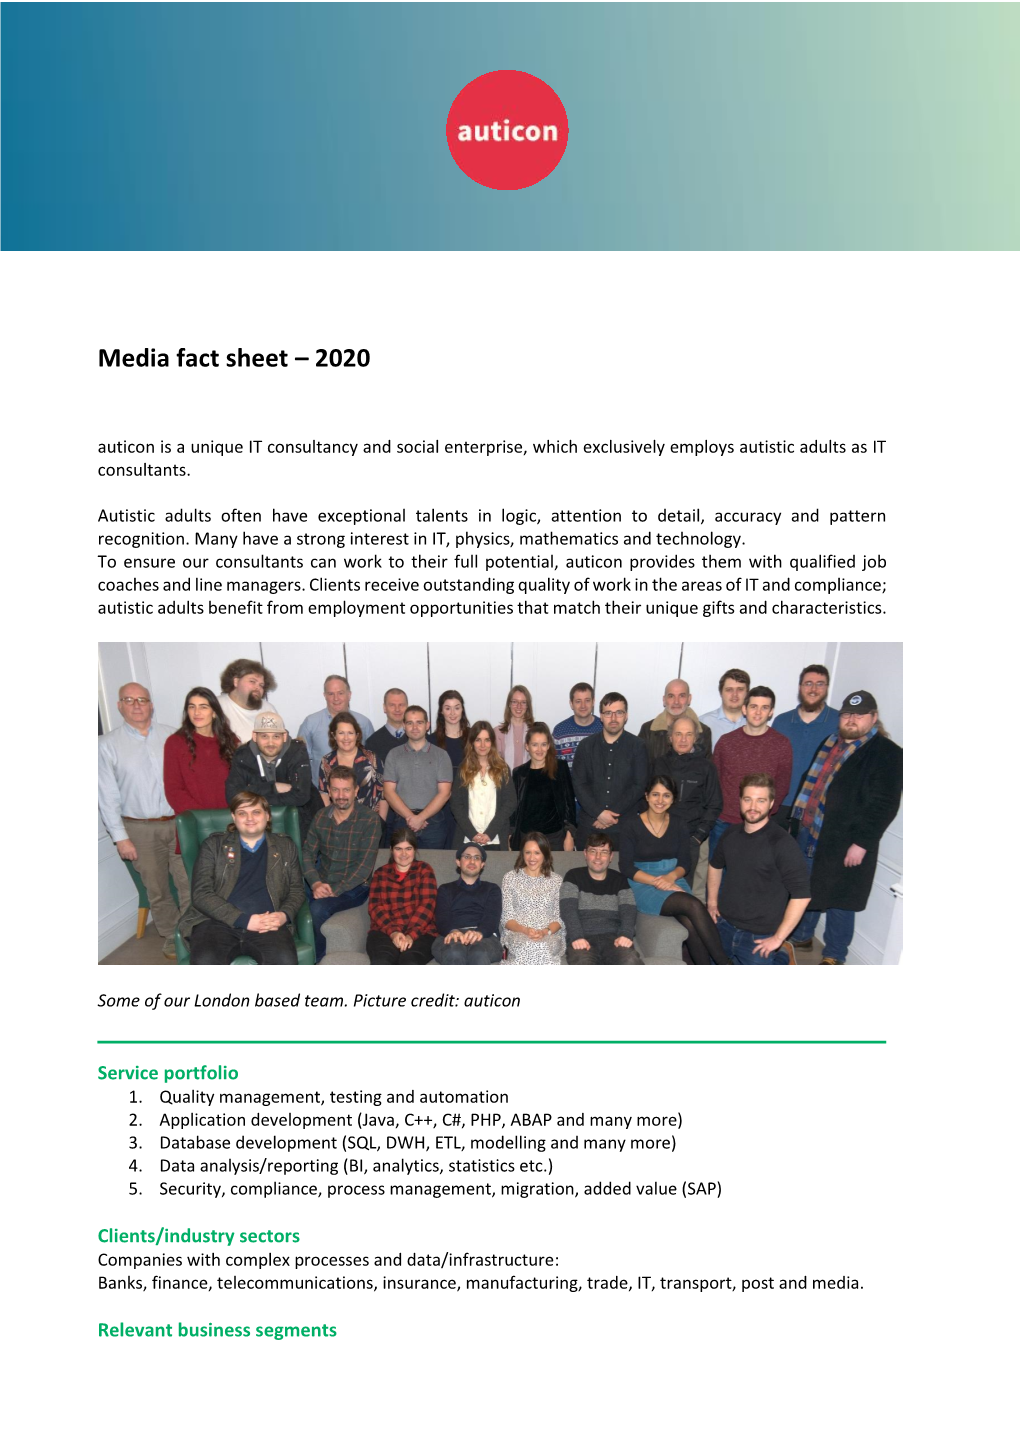 Media Fact Sheet – 2020 Auticon Is a Unique IT Consultancy and Social Enterprise, Which Exclusively Employs Autistic Adults As IT Consultants